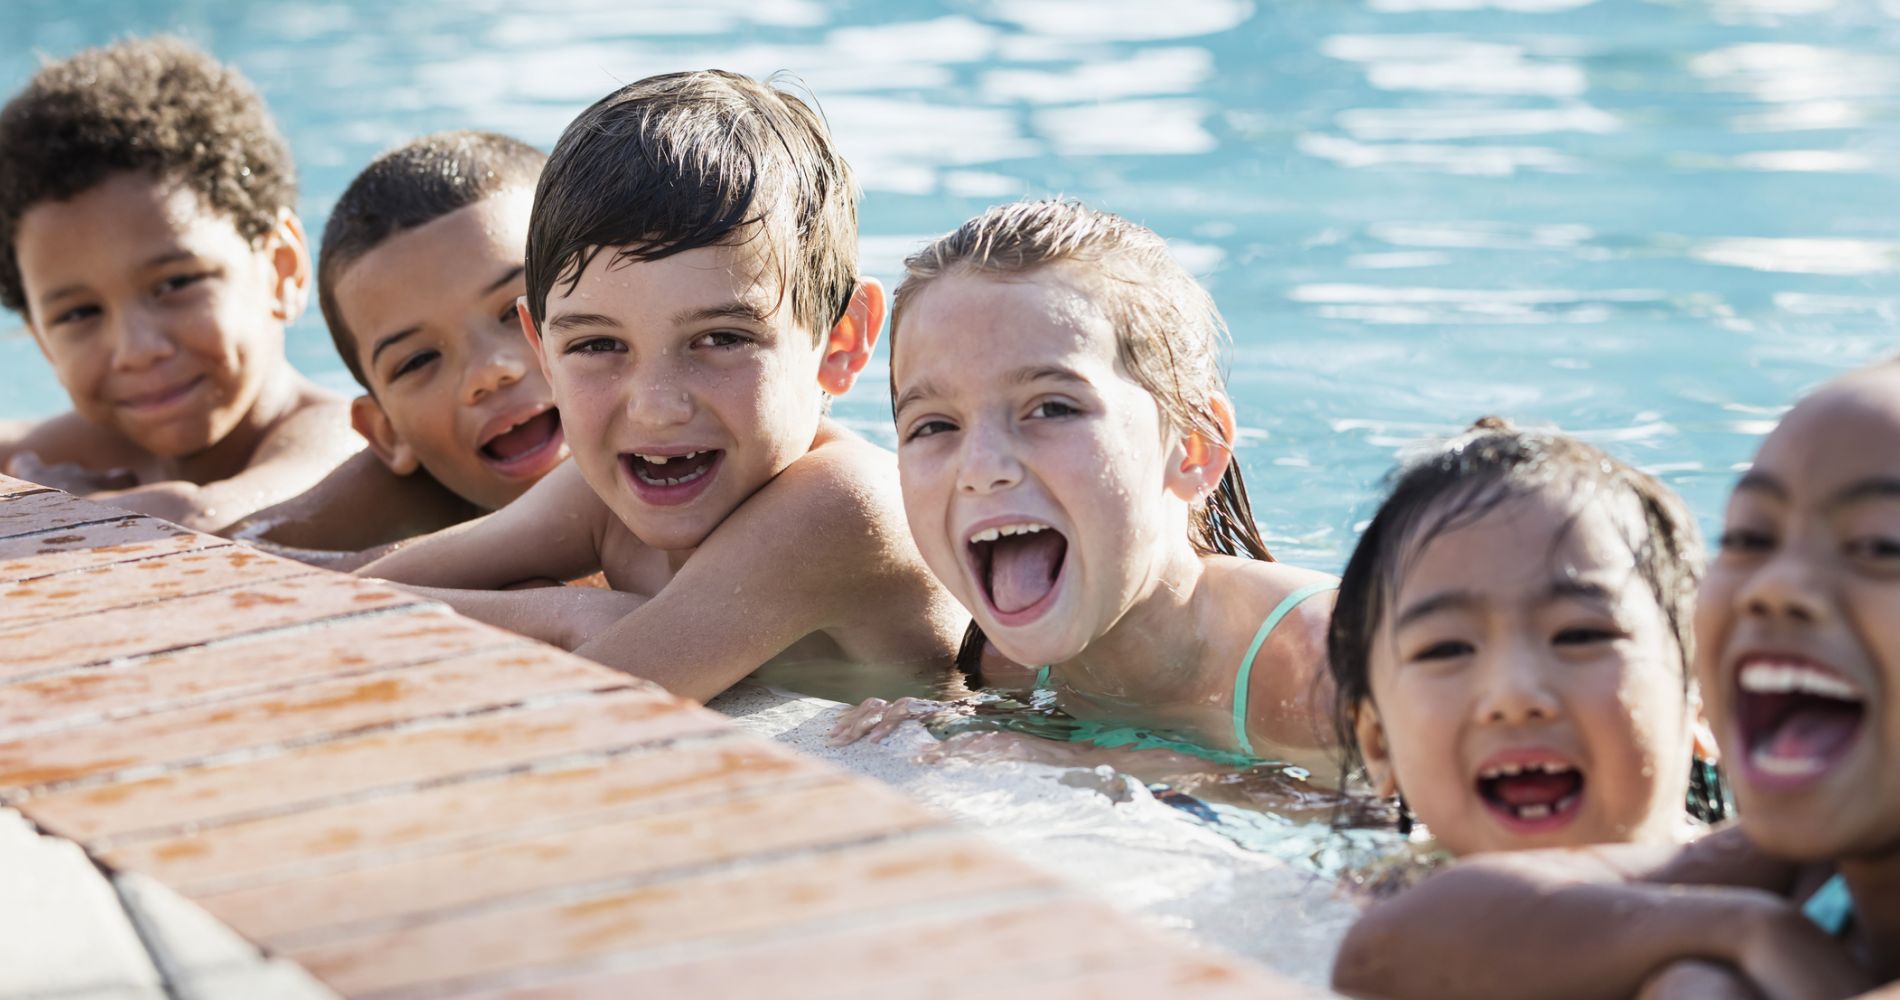 Six young children laugh in a pool with their elbows resting on the pool's edge.